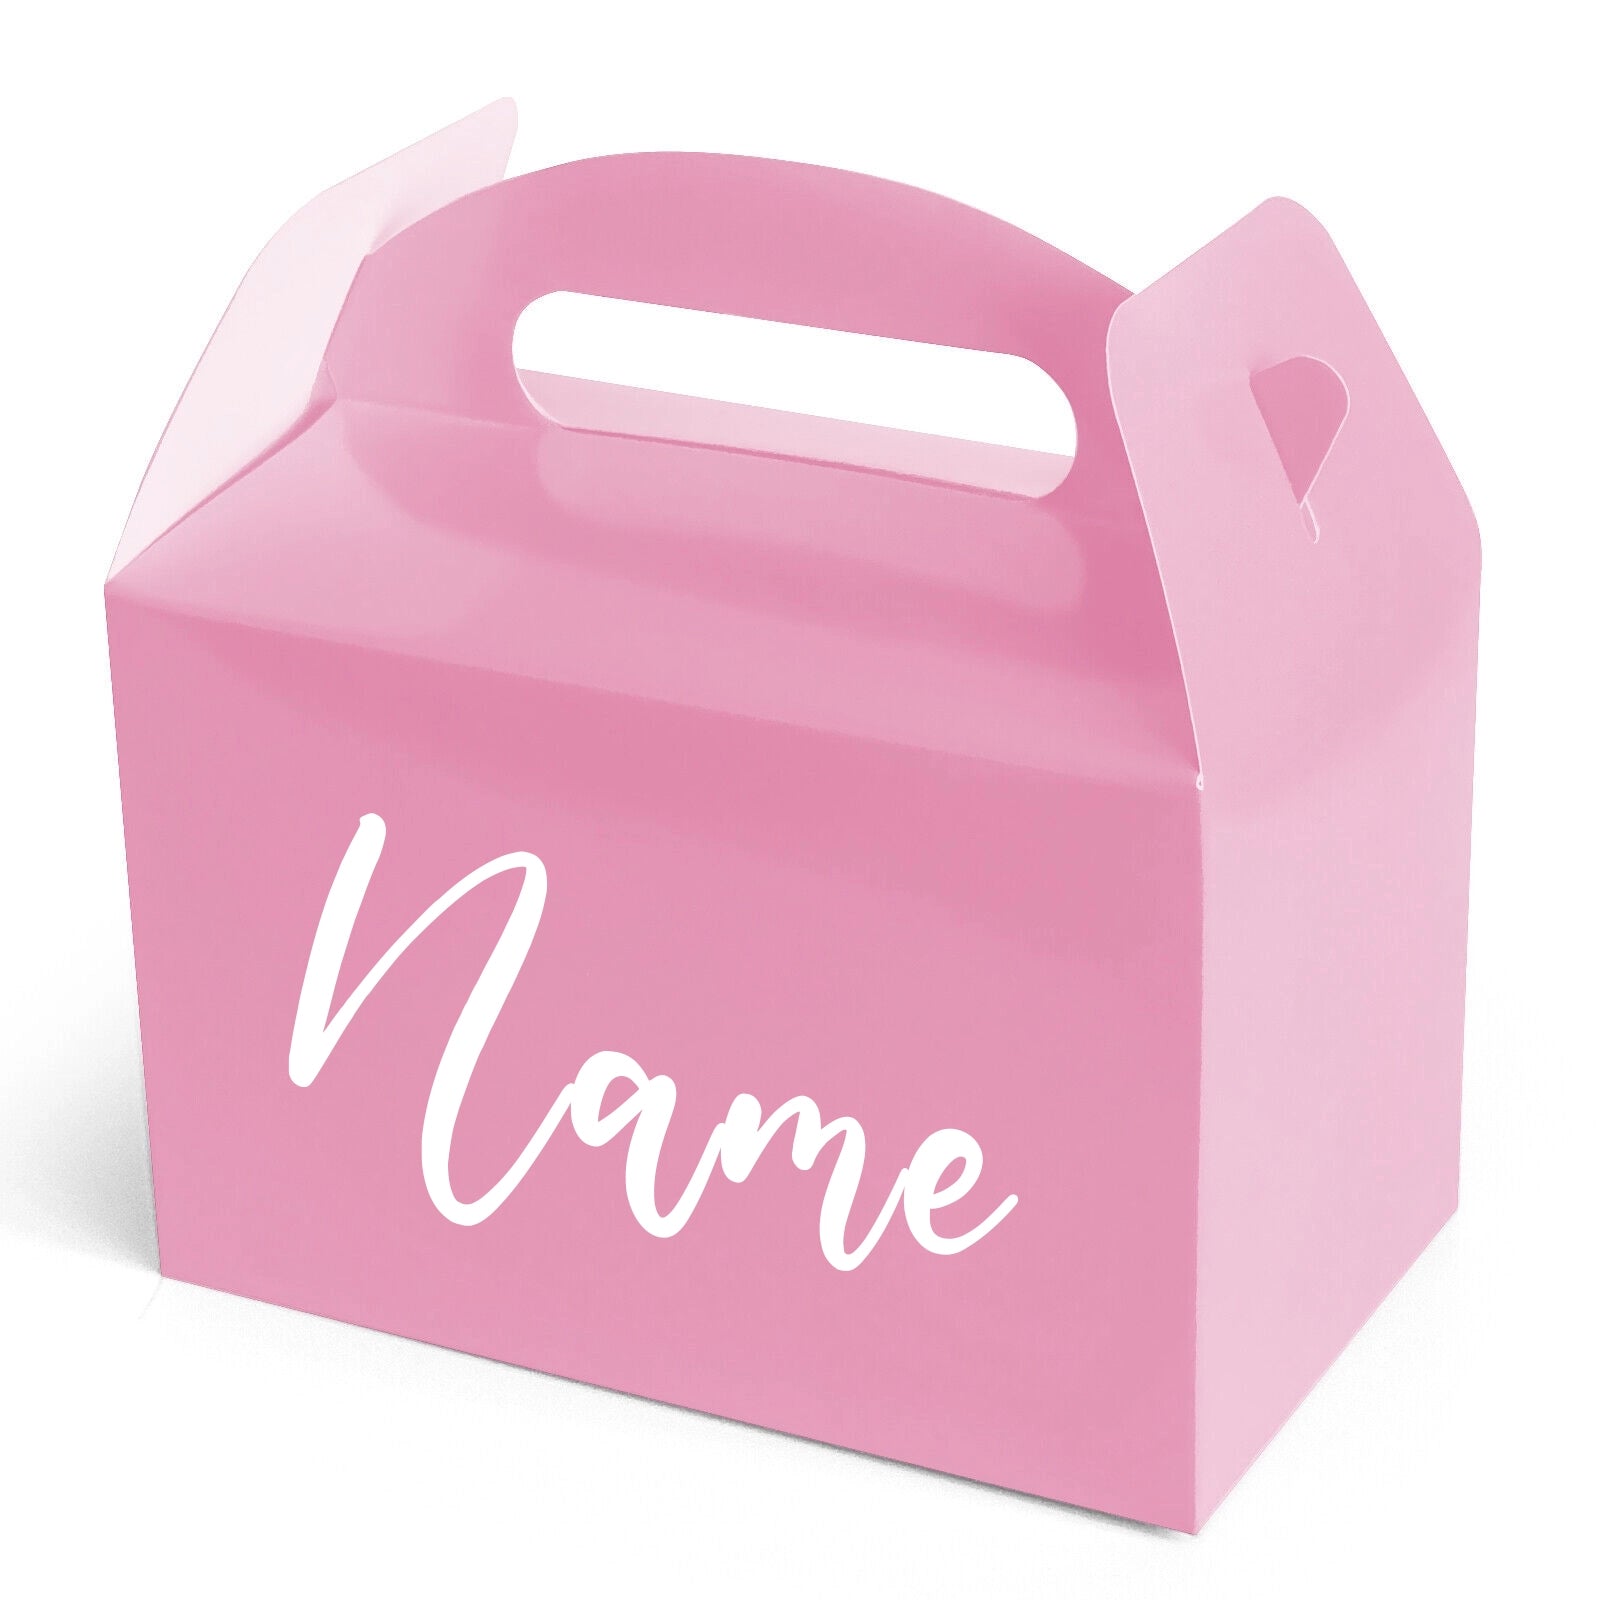 Personalised Party Boxes Gift Loot Box Any Name - Pink Boxes